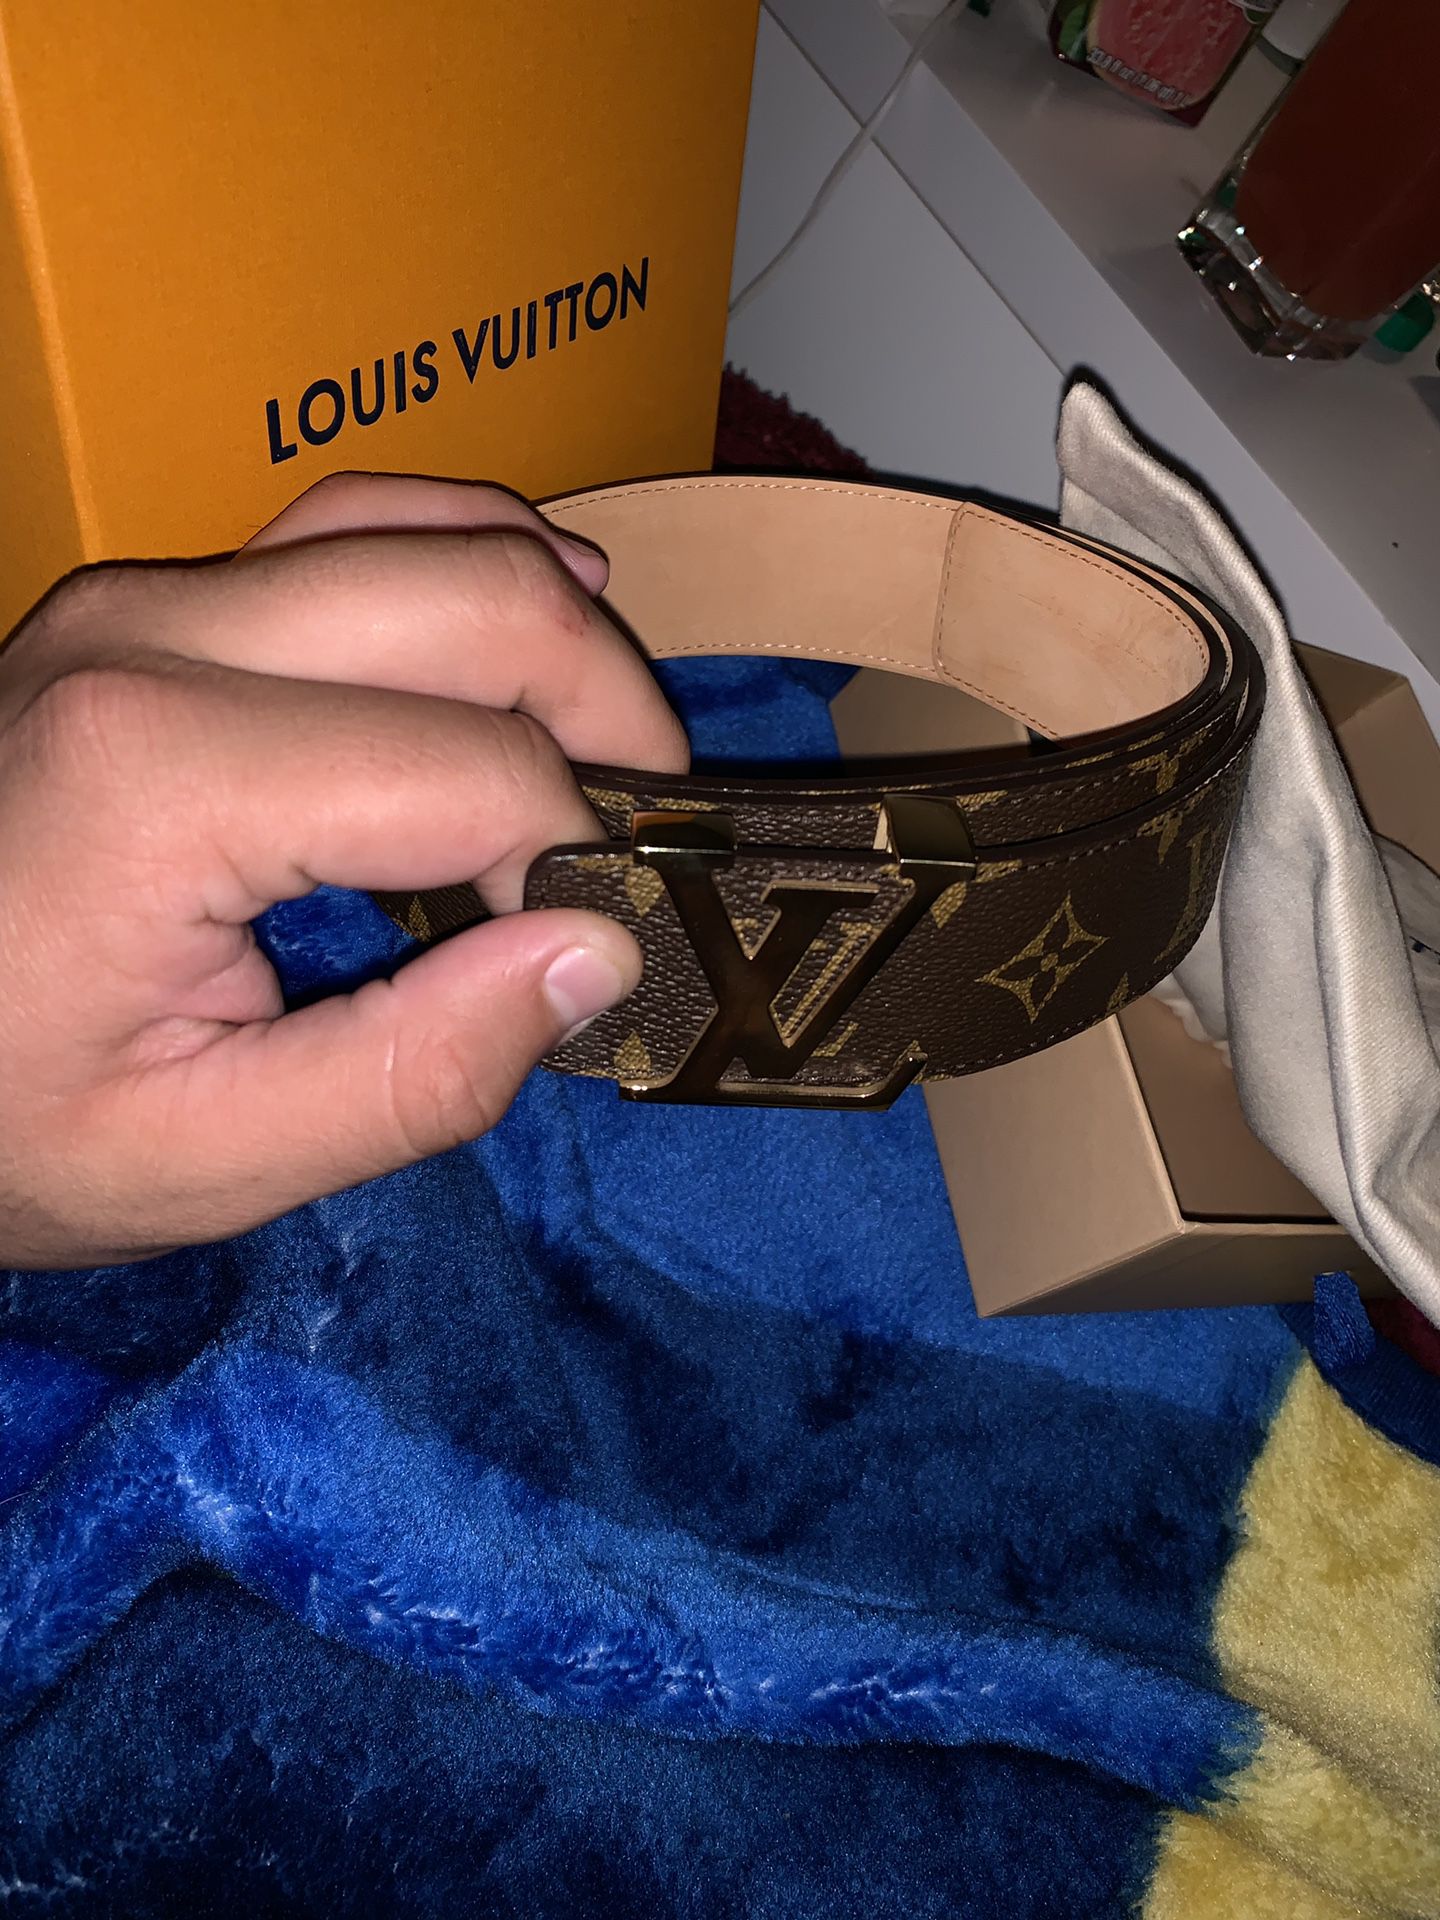 BRAND NEW Lv Louis Vuitton belt SIZE 40 for Sale in San Mateo